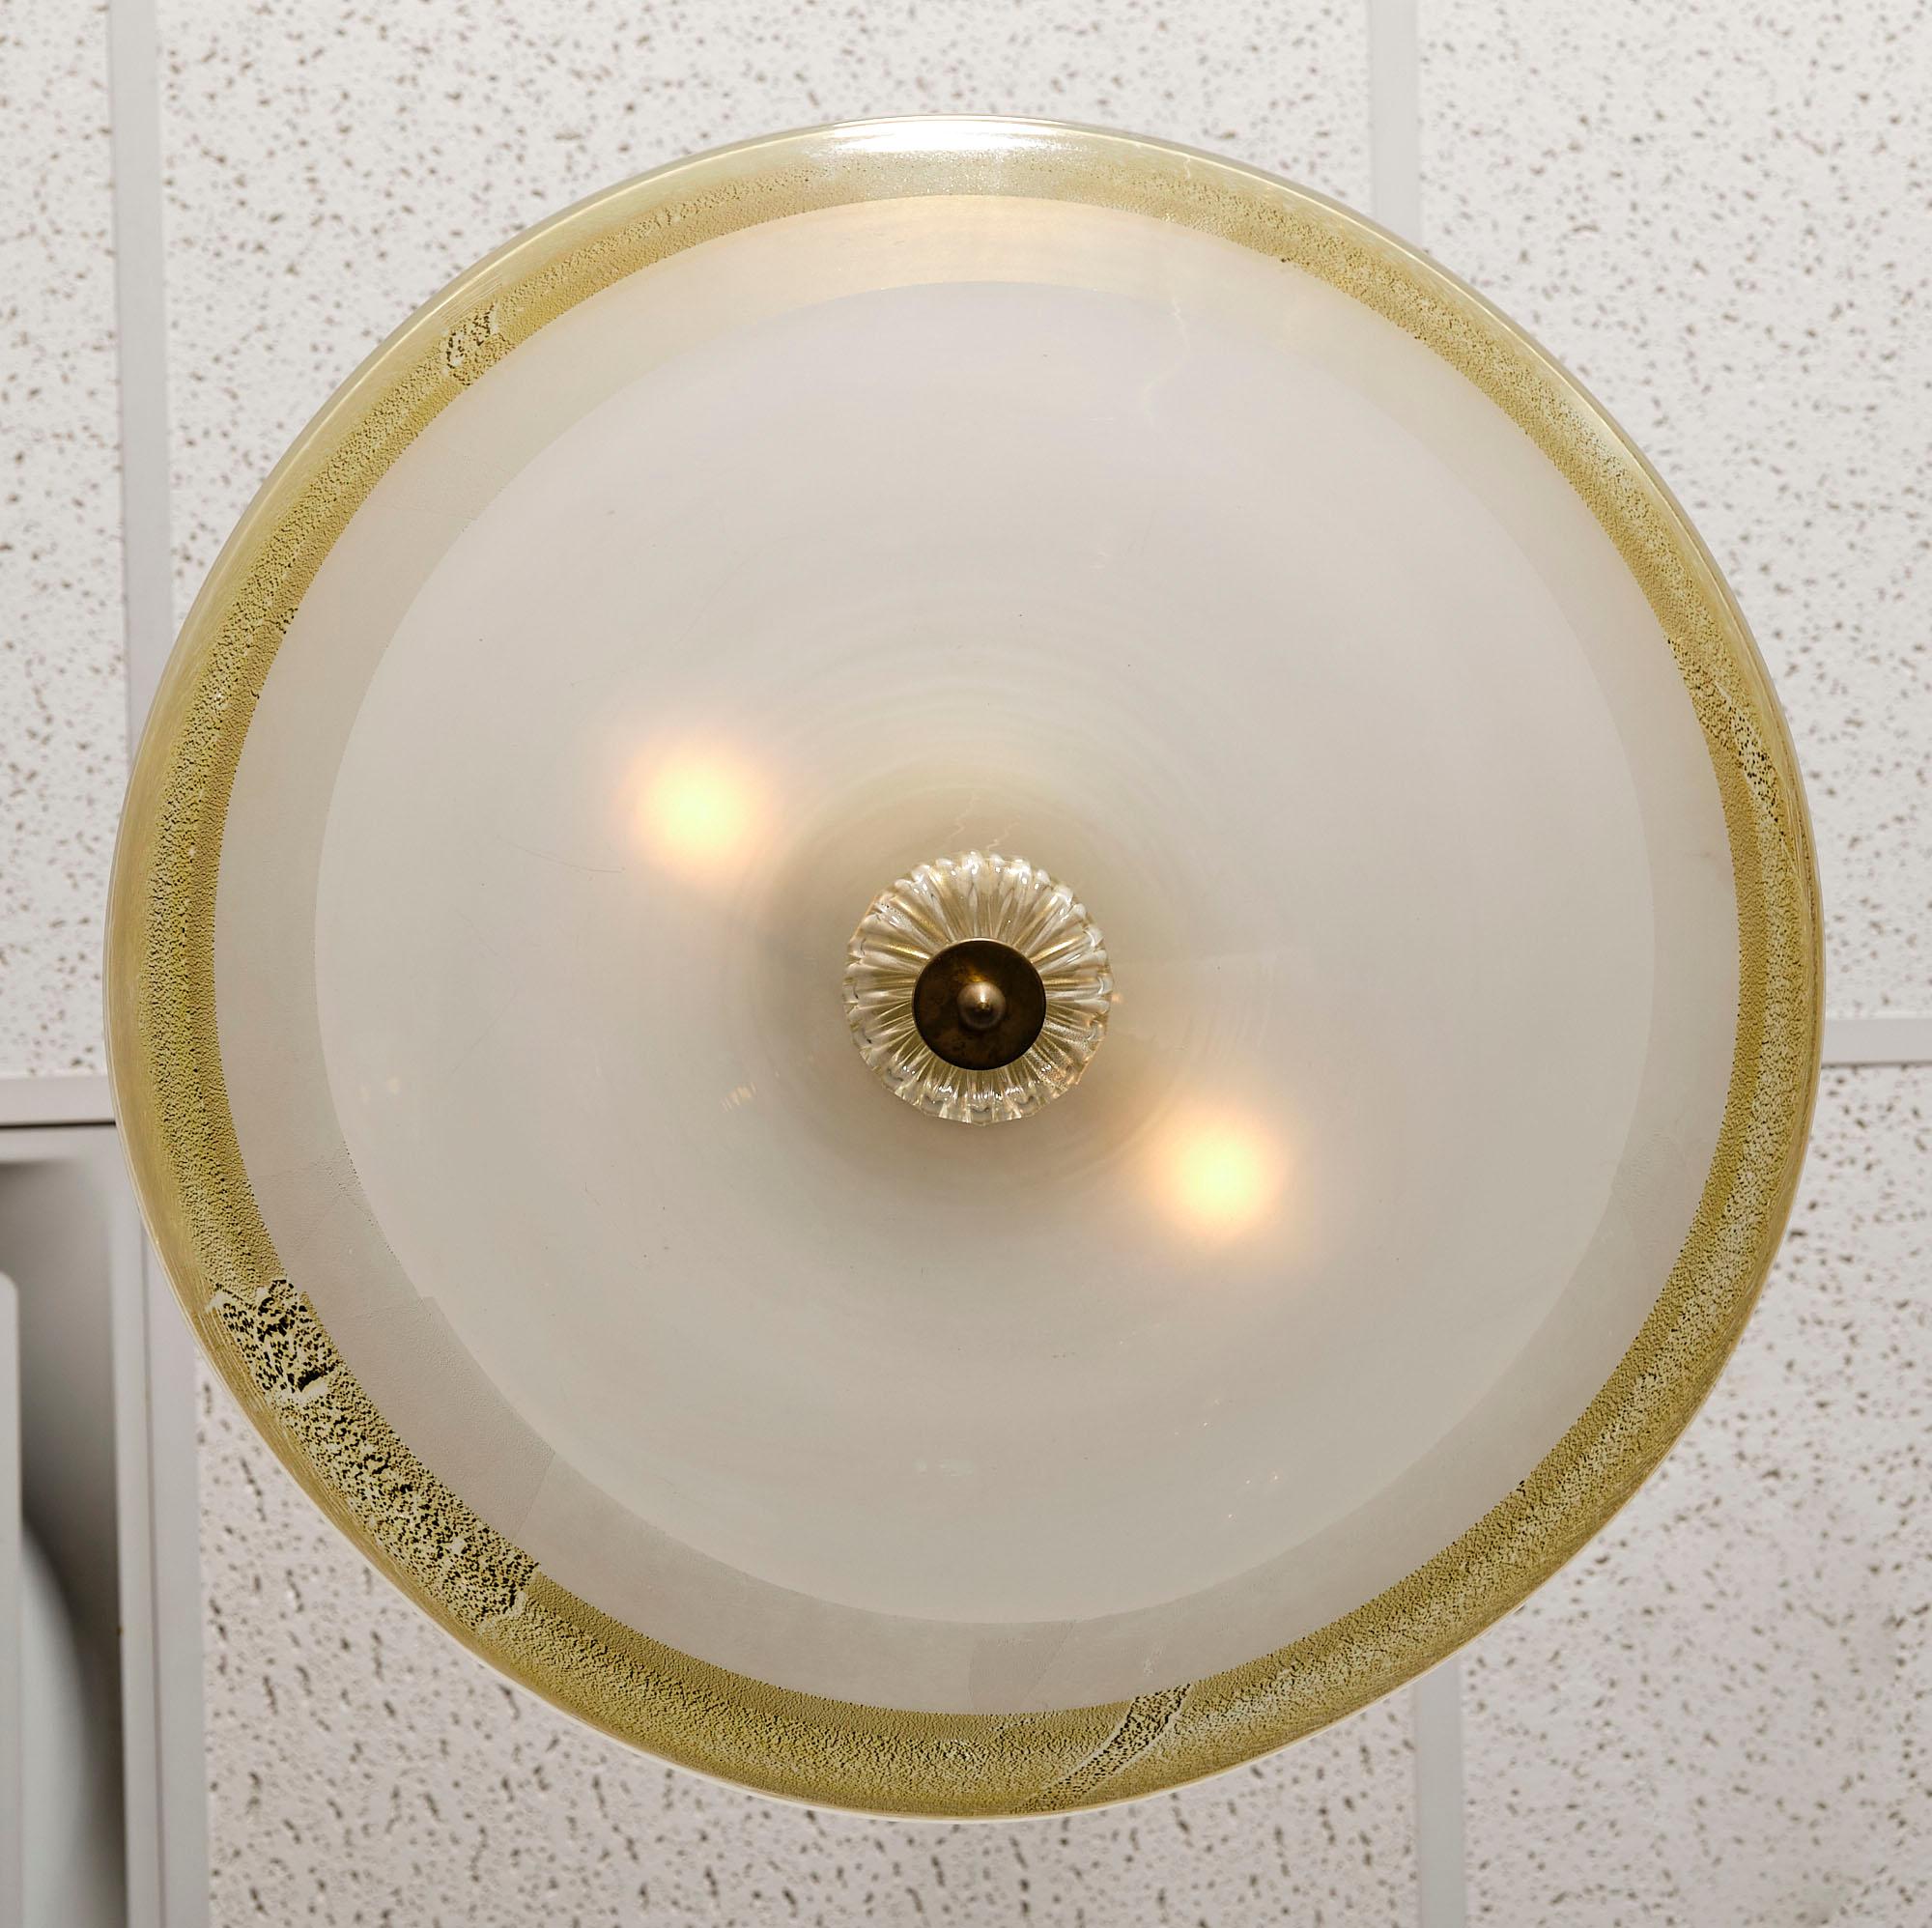 Ceiling fixture from the island of Murano made of opaline glass fixed with 24 carat gold leaf. There is a beautiful ridged glass finial. This piece has two medium base bulbs.